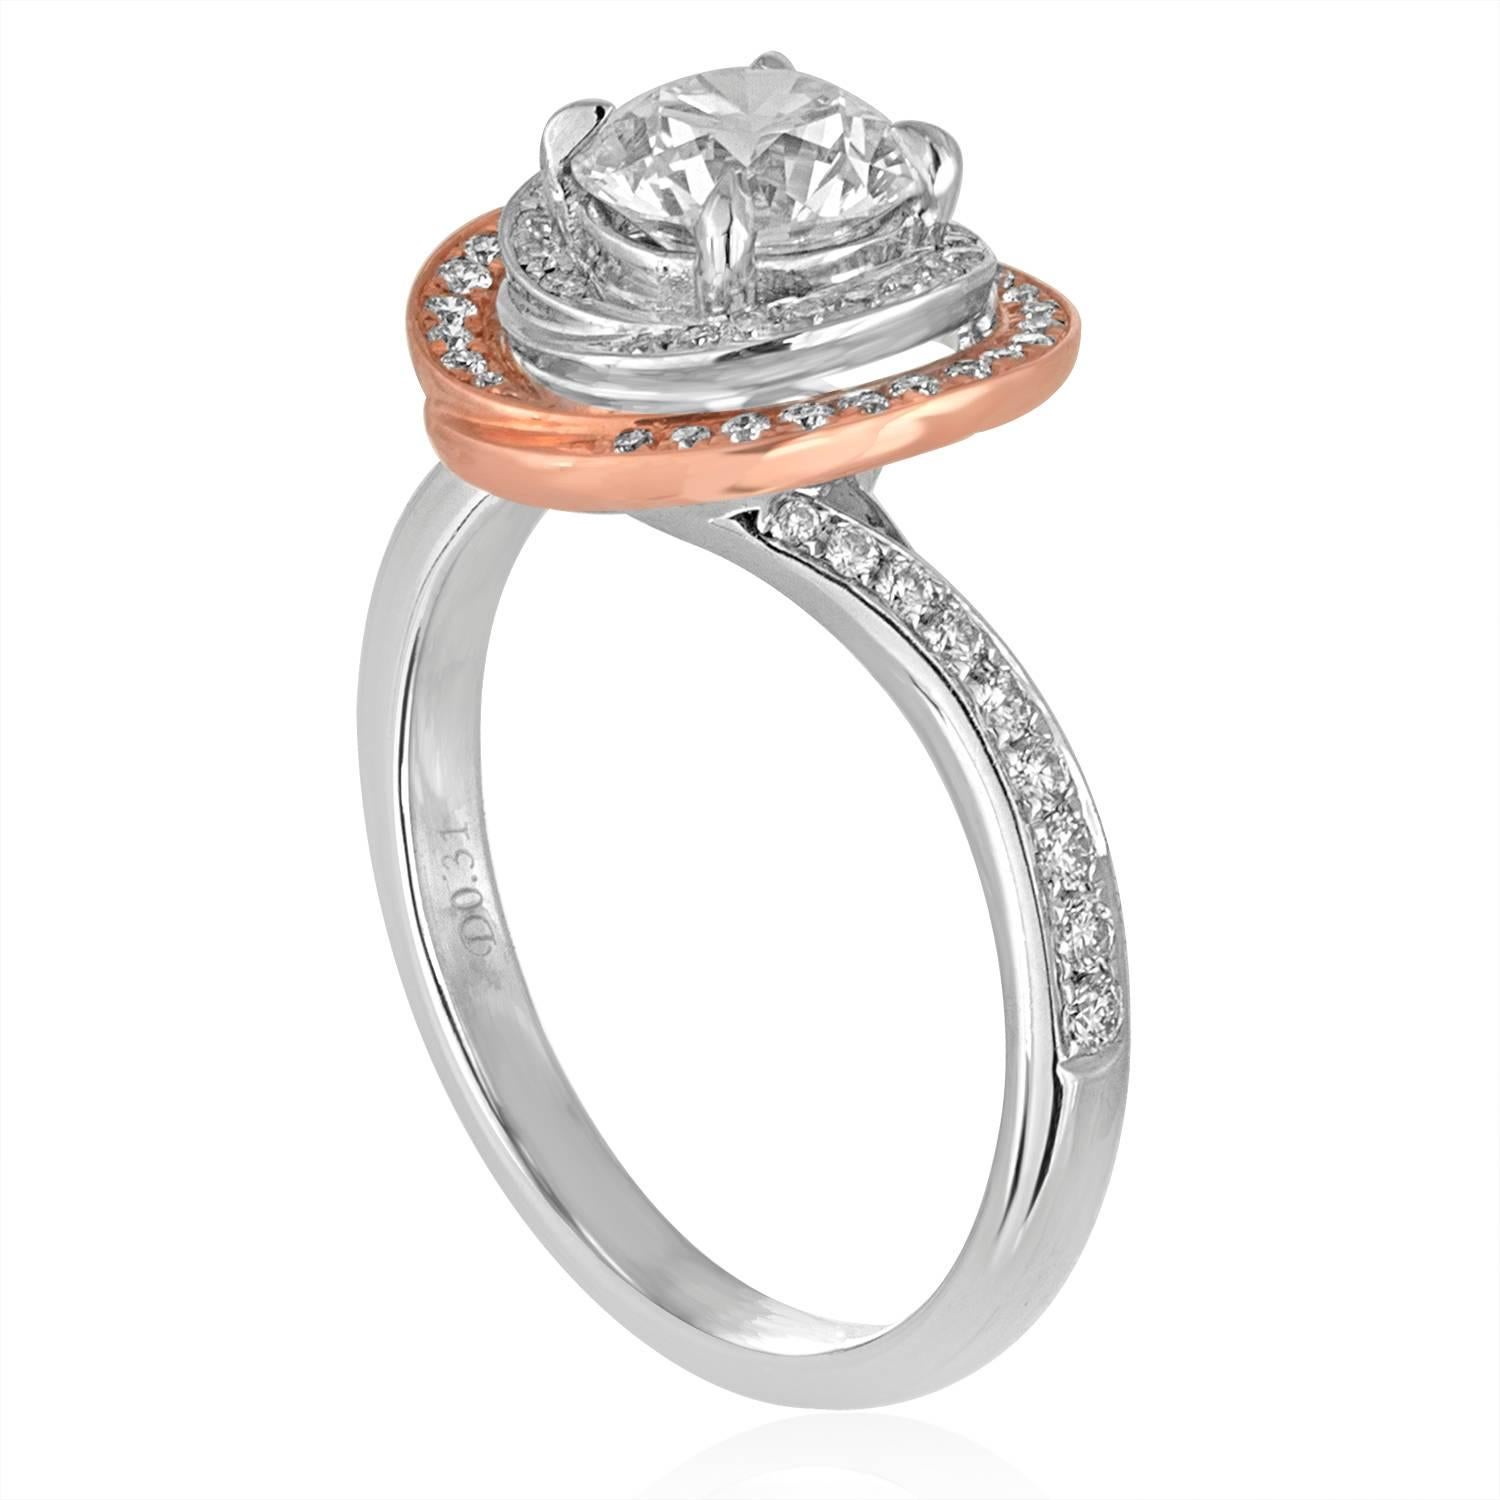 The ring is 18K White & Rose Gold Halo Engagement Ring
The center stone is GIA Certified 1.05 Ct F VS2
The Halo & Band has 0.31 Ct in Diamonds E/F VS
Size 6.5, sizable
The ring weighs 4.5 grams
